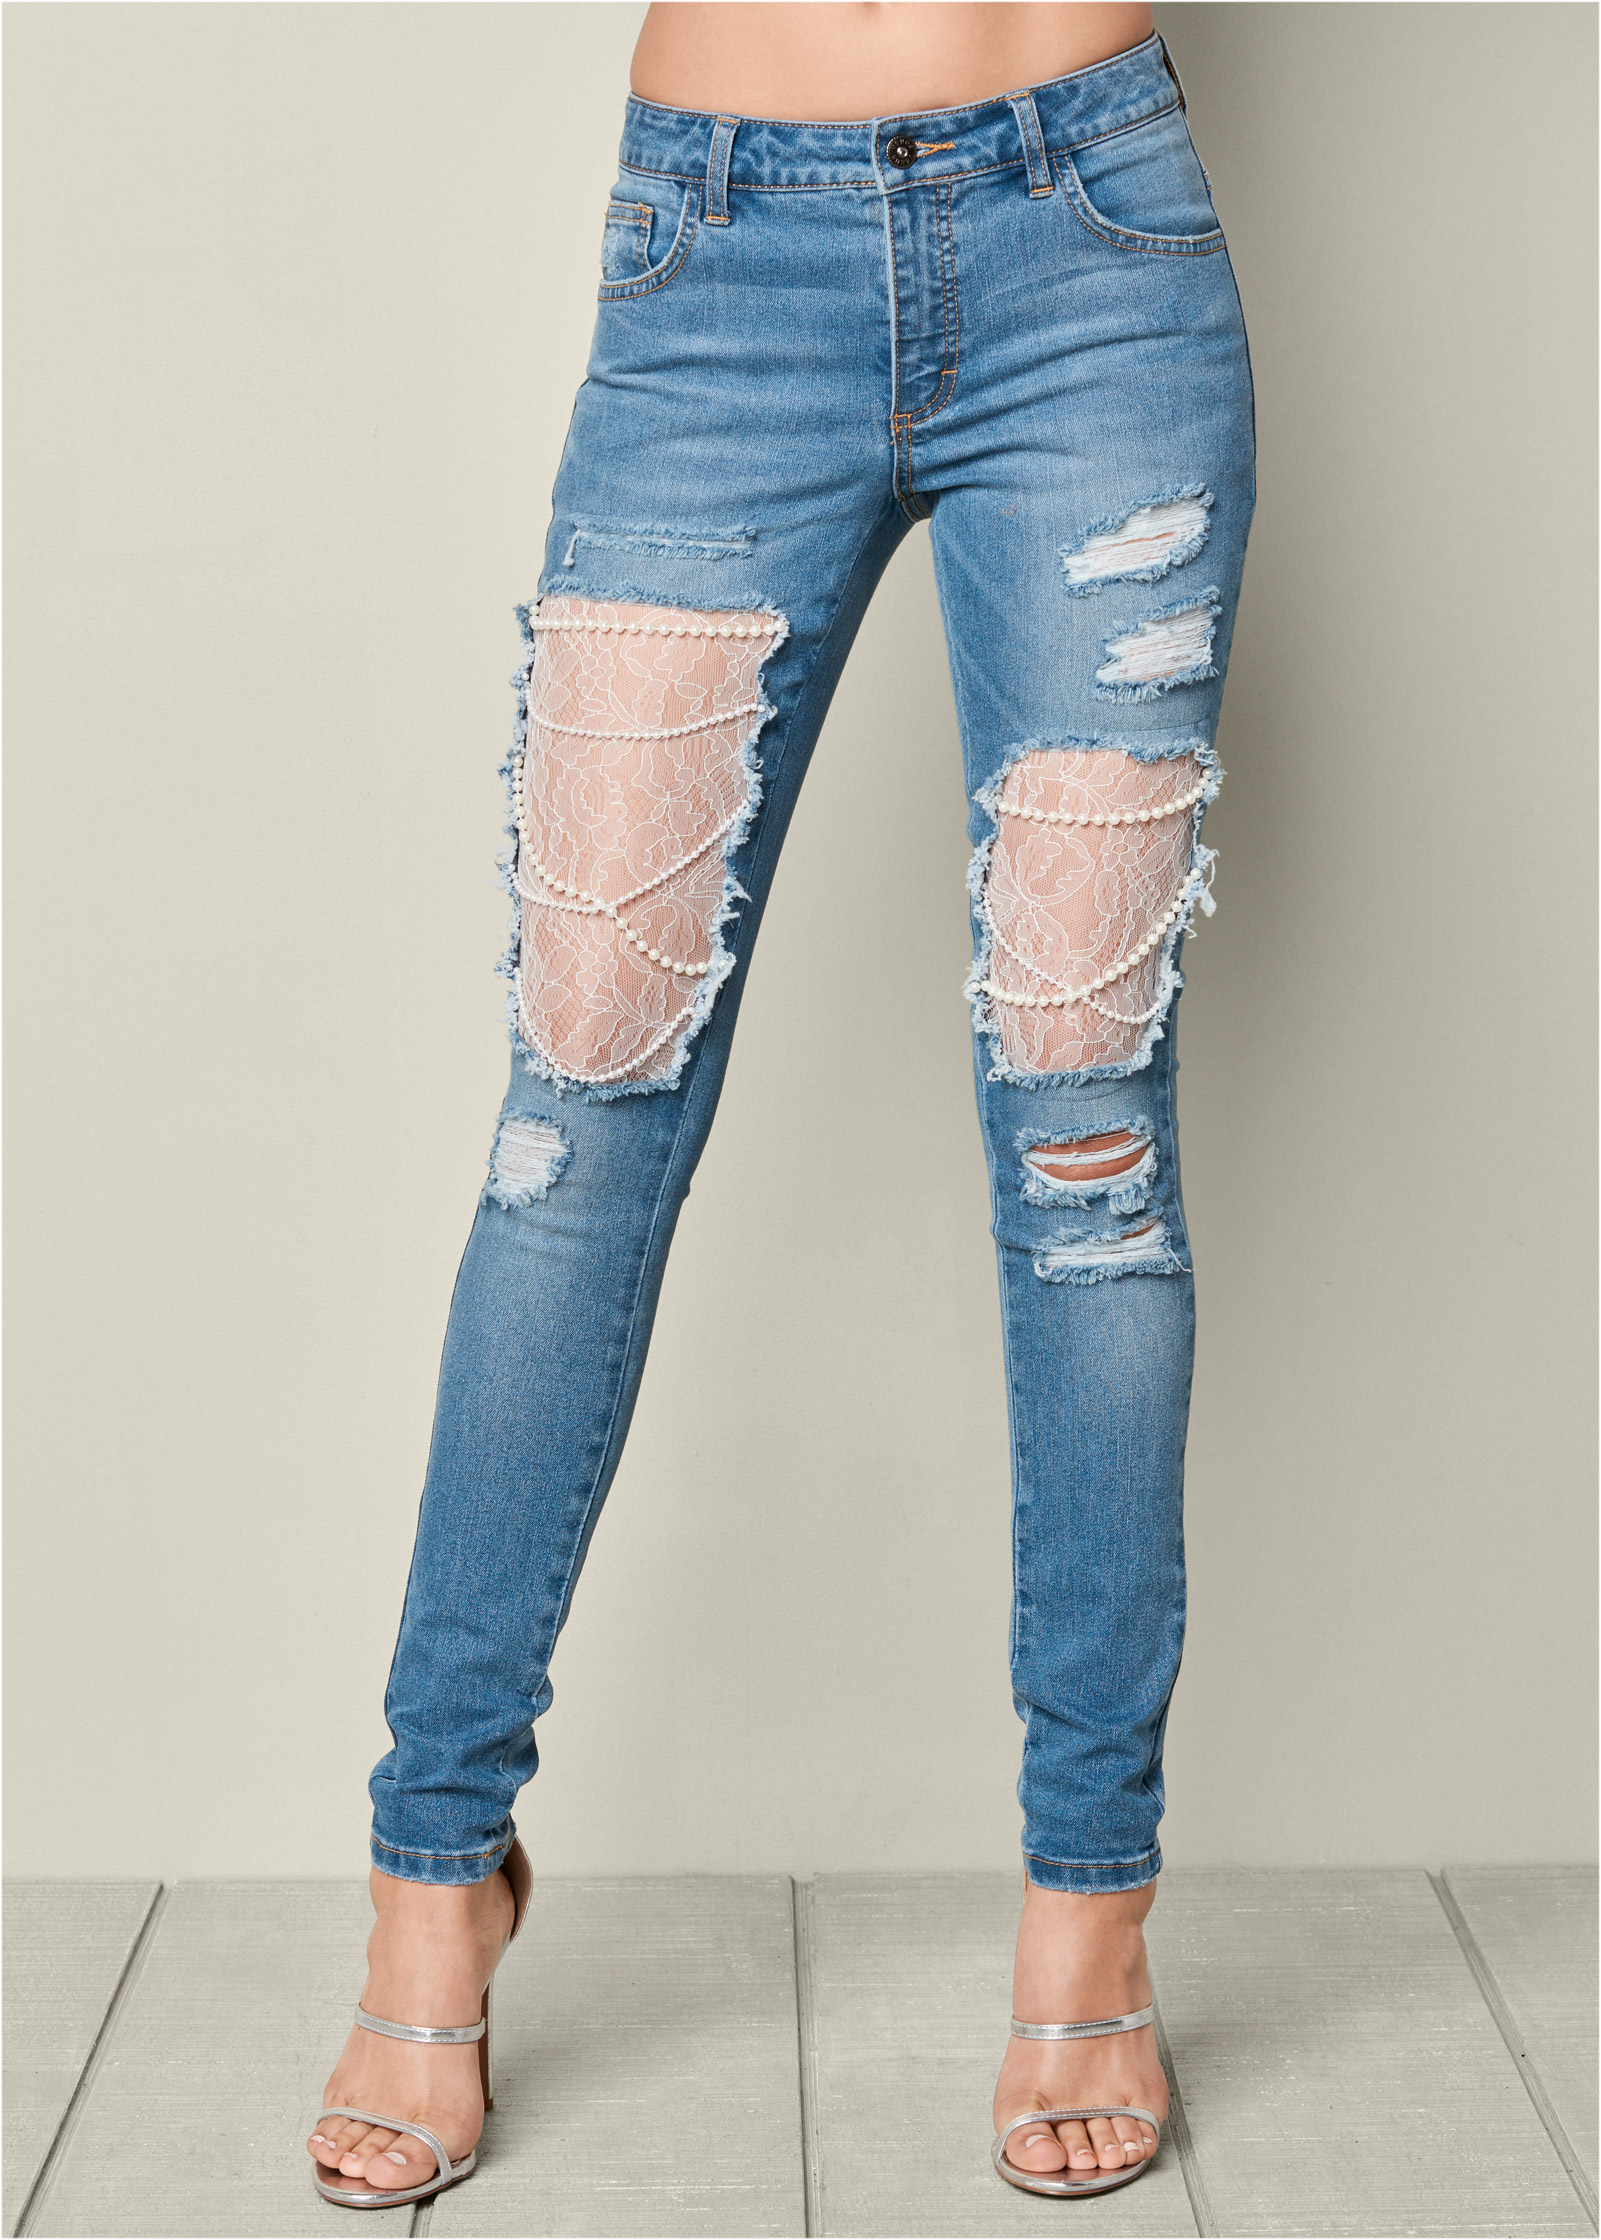 ripped jeans with pearls on them